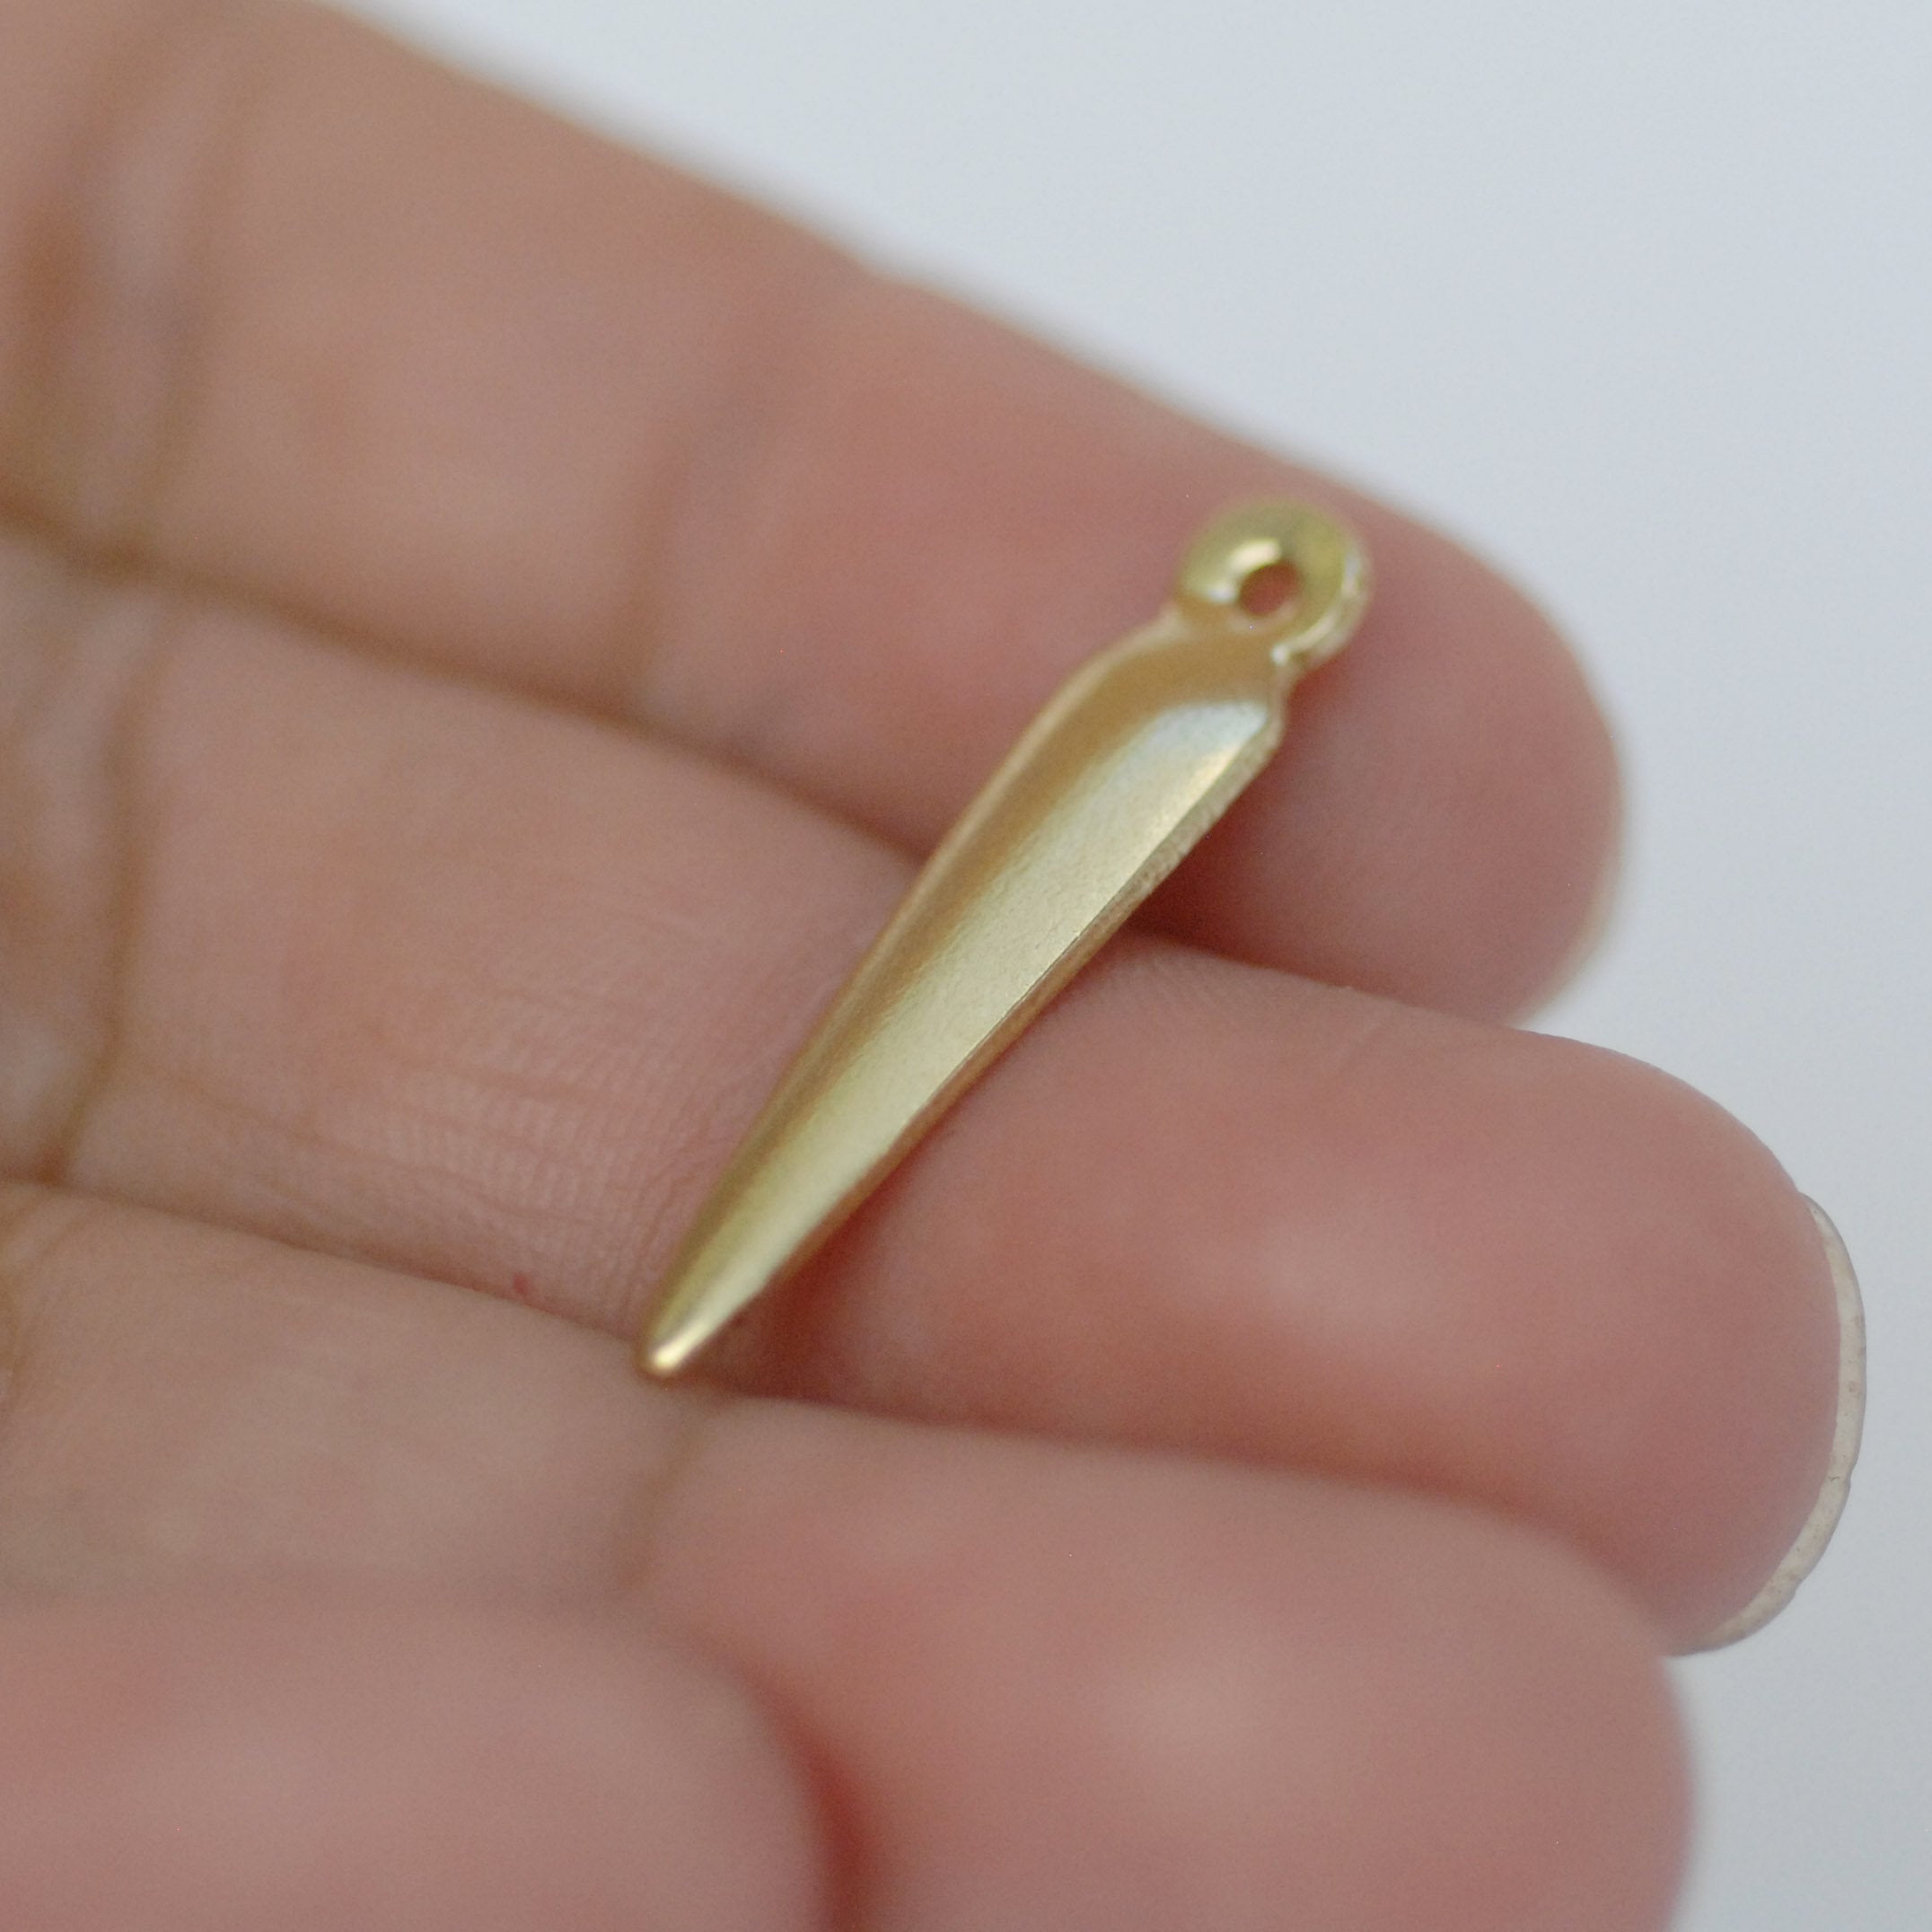 Long teardrop charm with hole for making jewelry - copper, brass, bronze, nickel silver, 24g 22g 20g